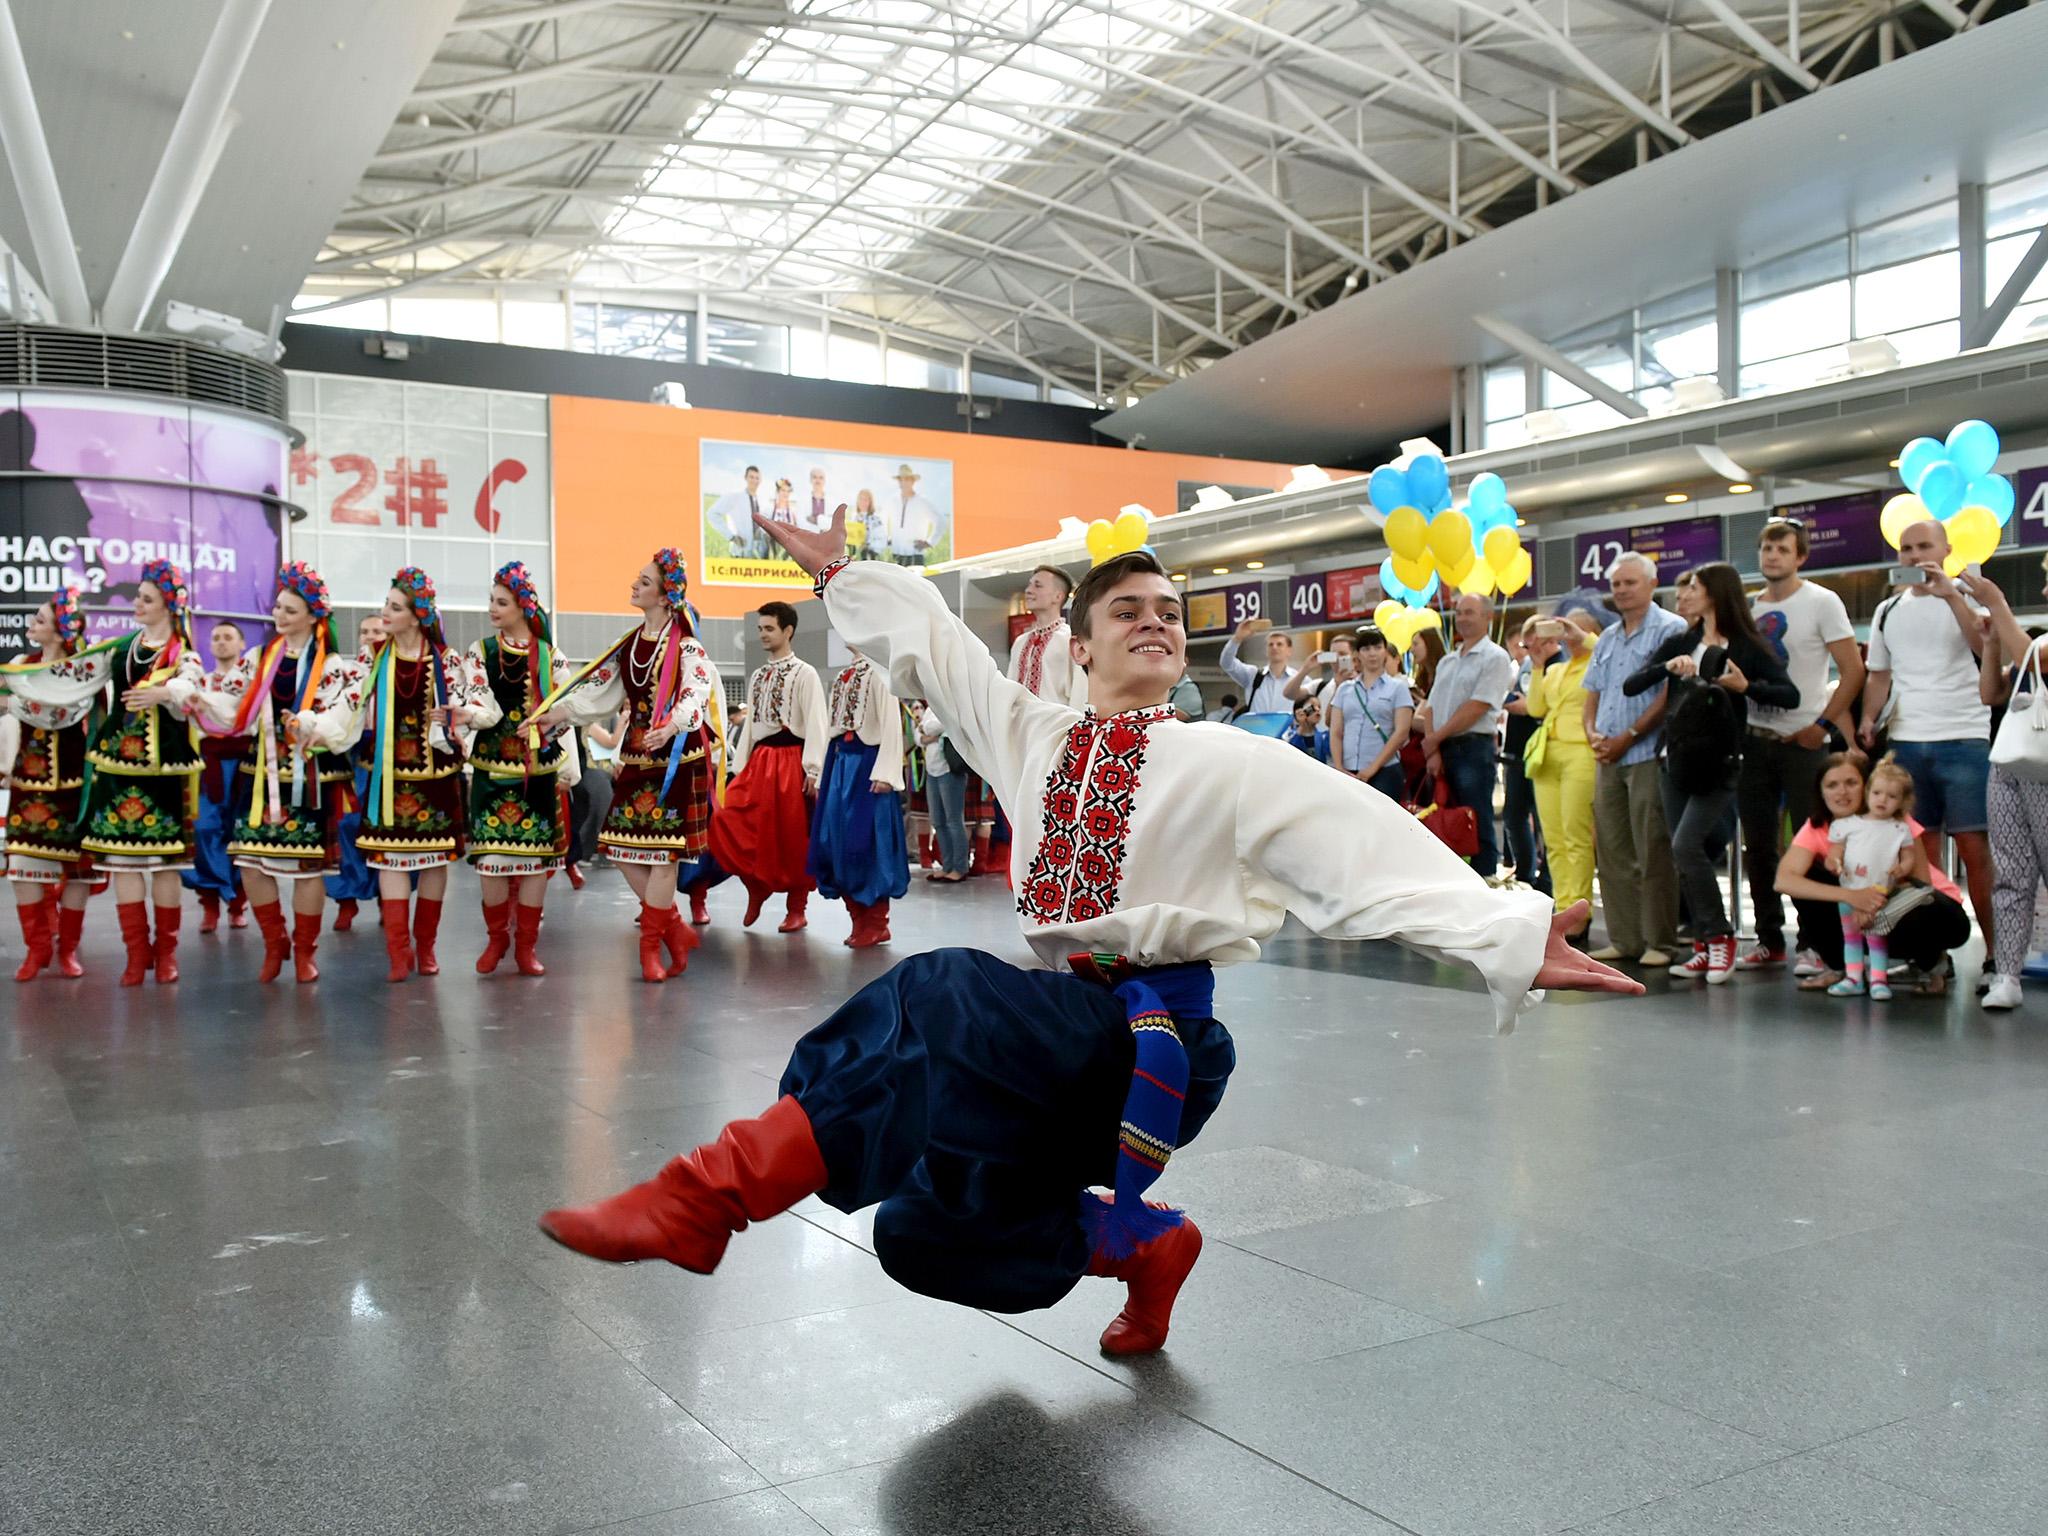 Traditional dancers perform in Kiev on the first day of visa-free travel for Ukrainian nationals to the EU